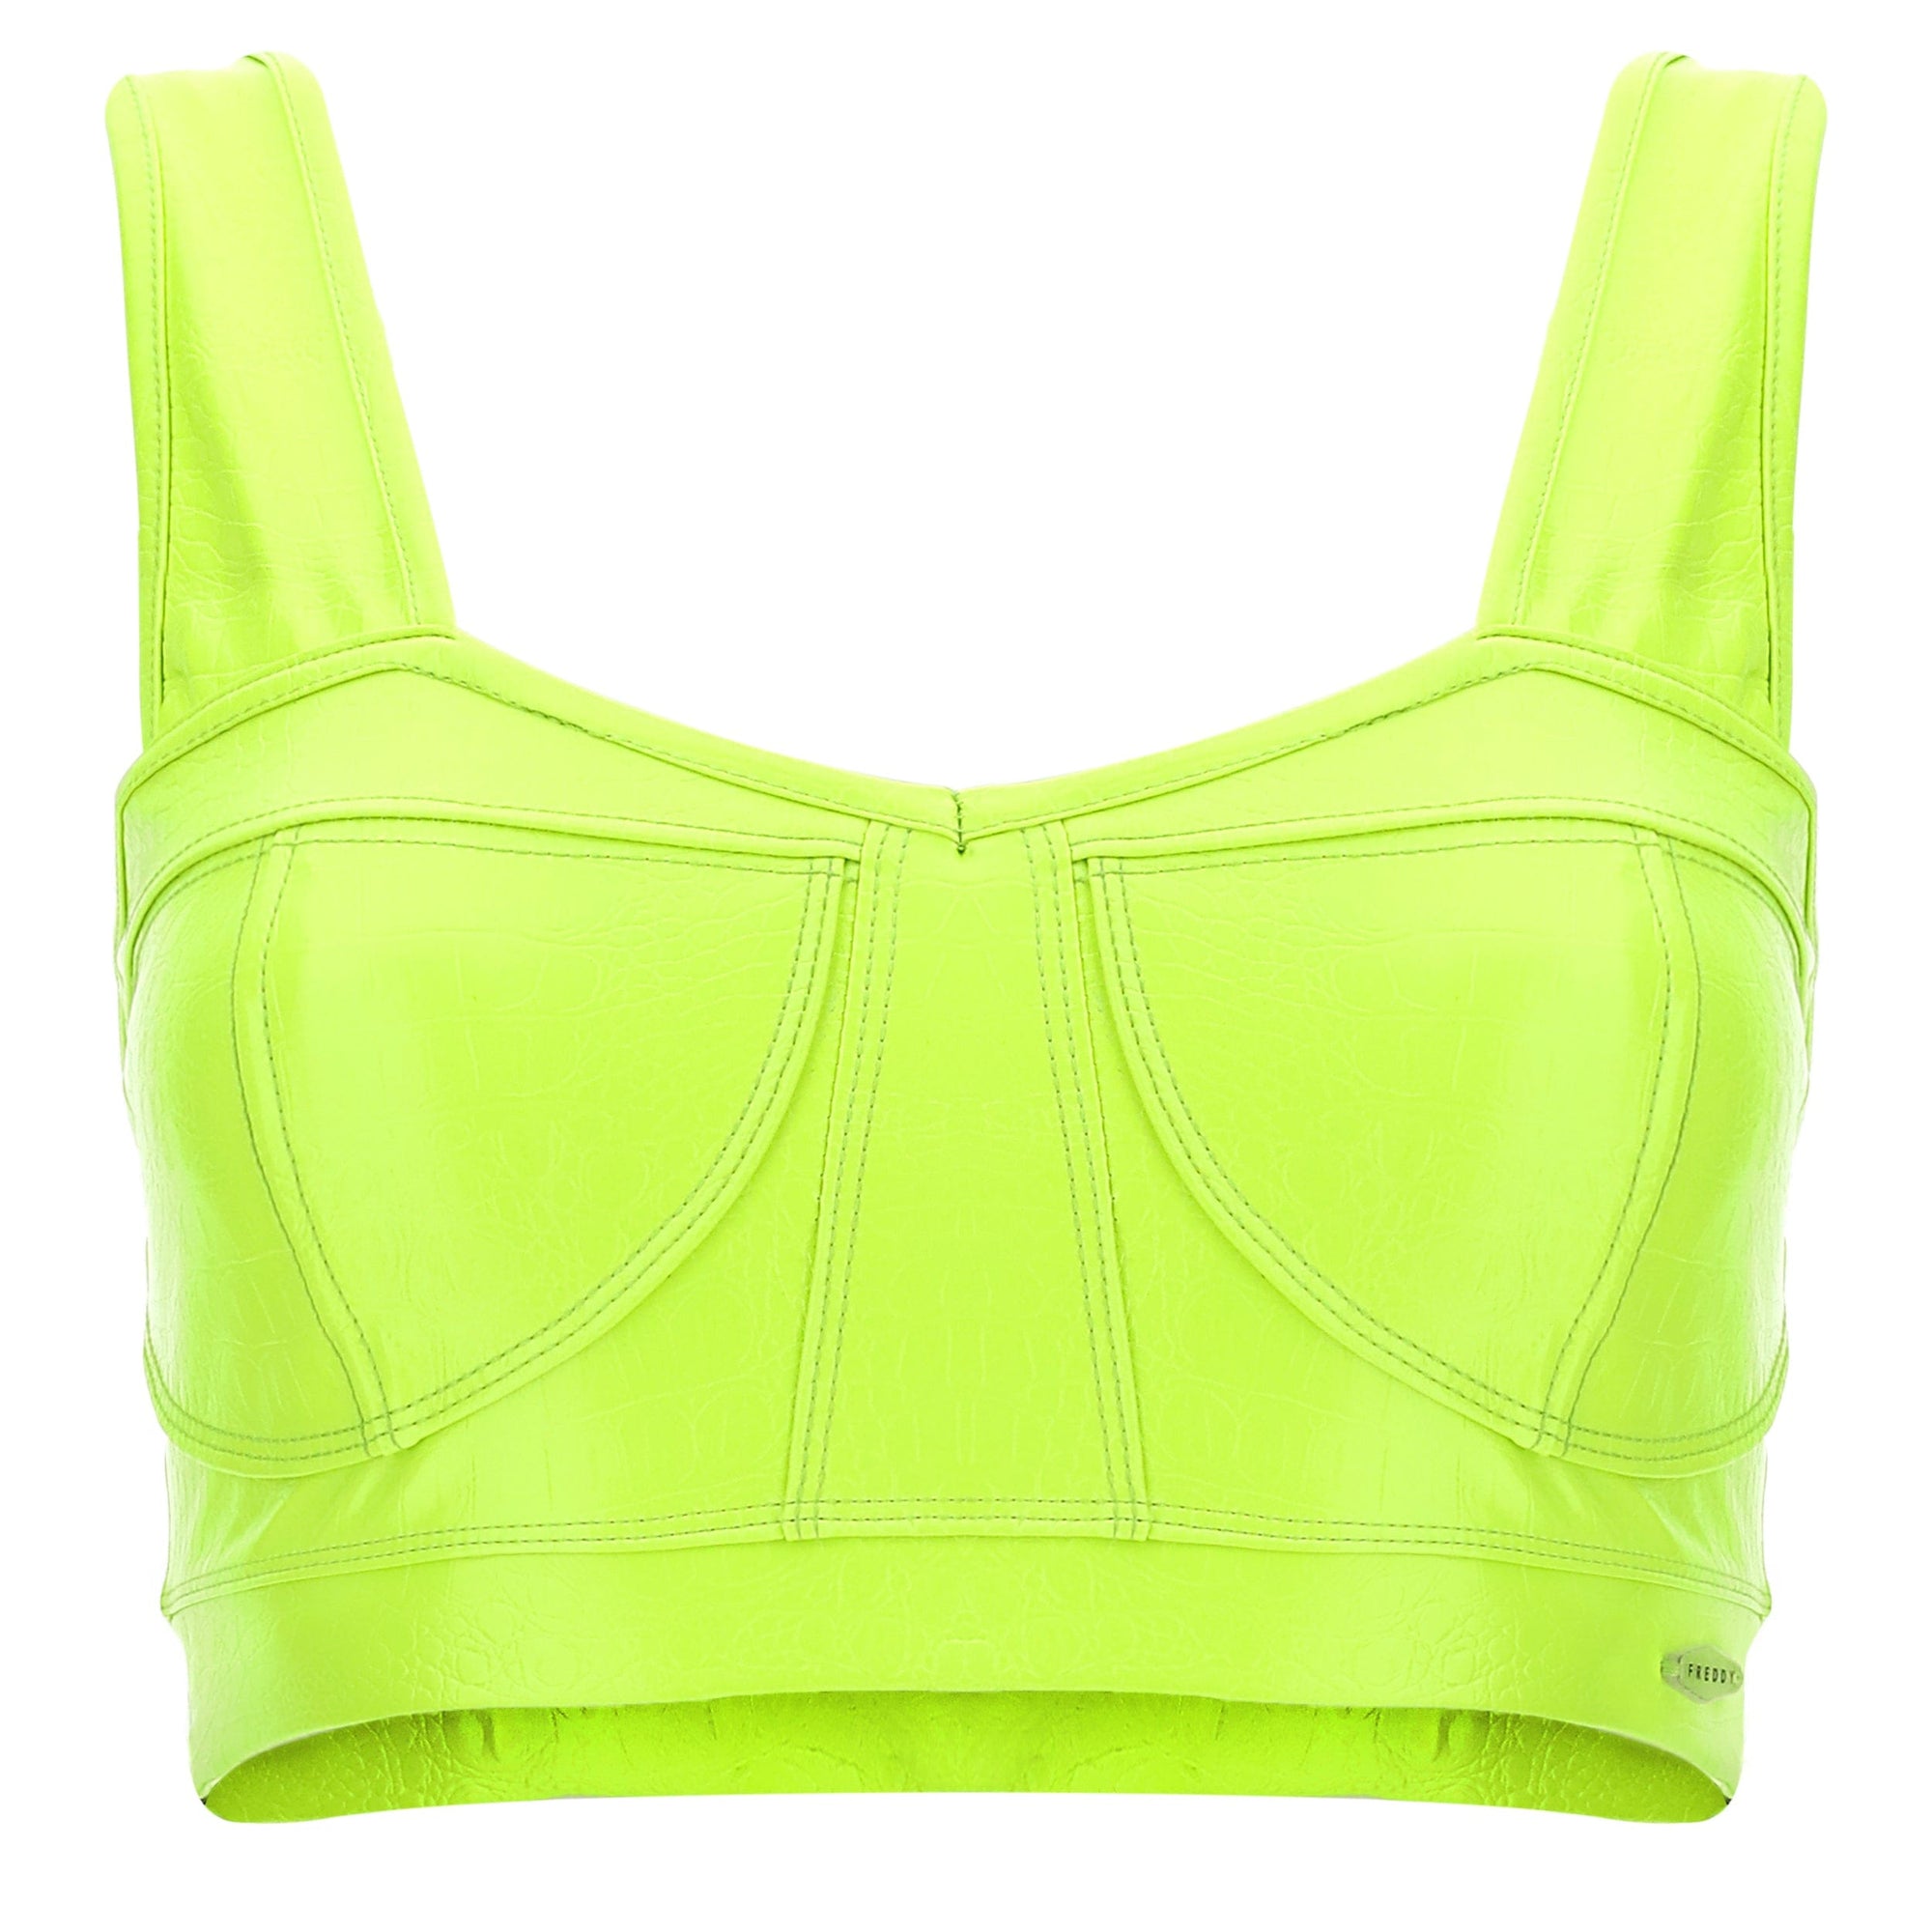 Faux leather Crocodile Bustier - Lime Green 1